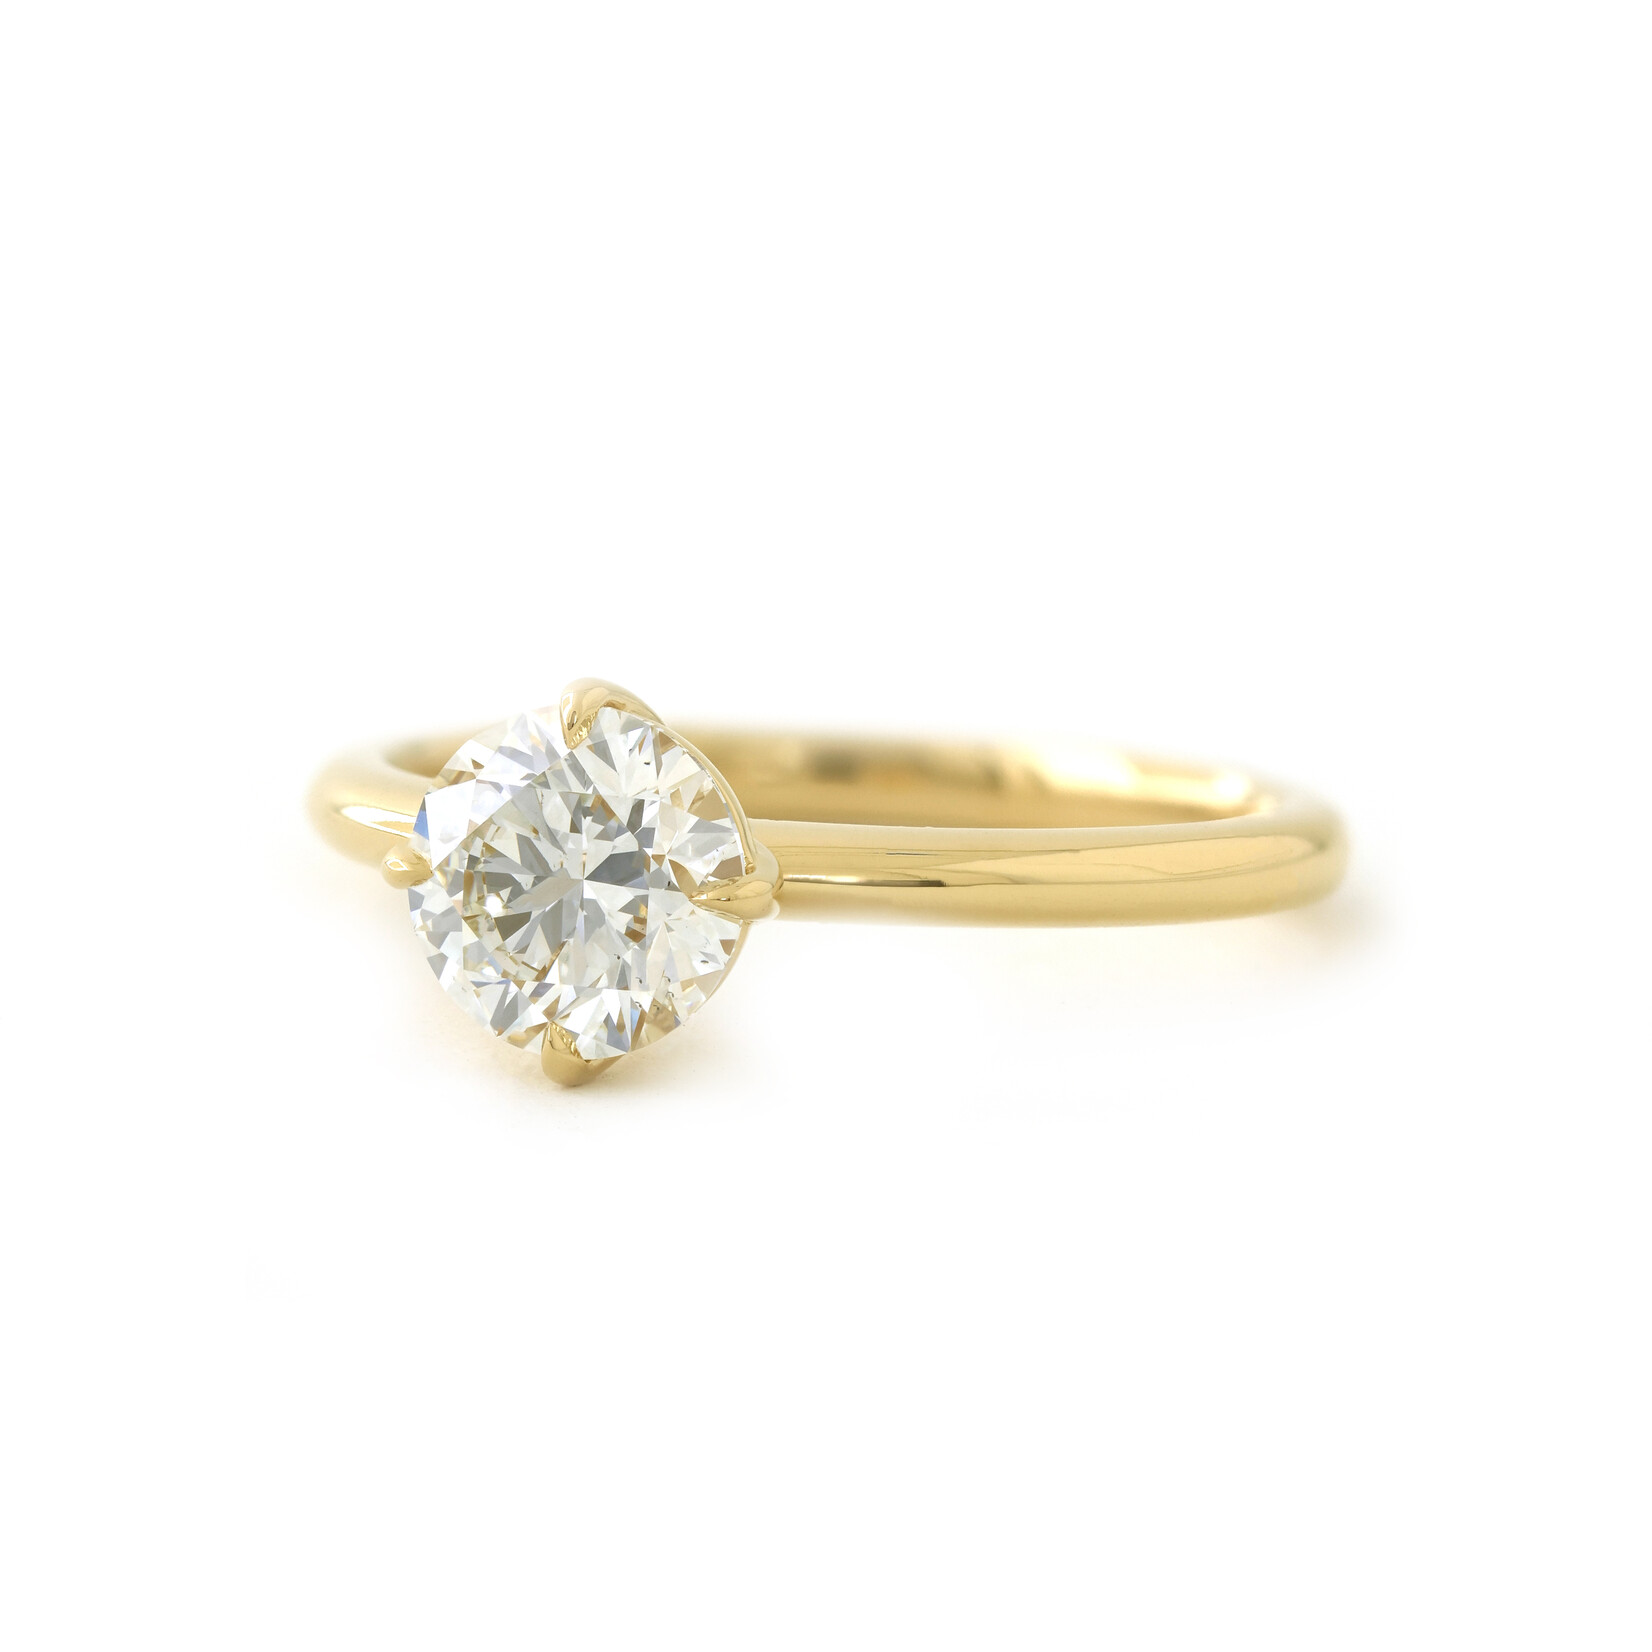 Baxter Moerman Isla Solitaire Ring with 1.20ct Diamond